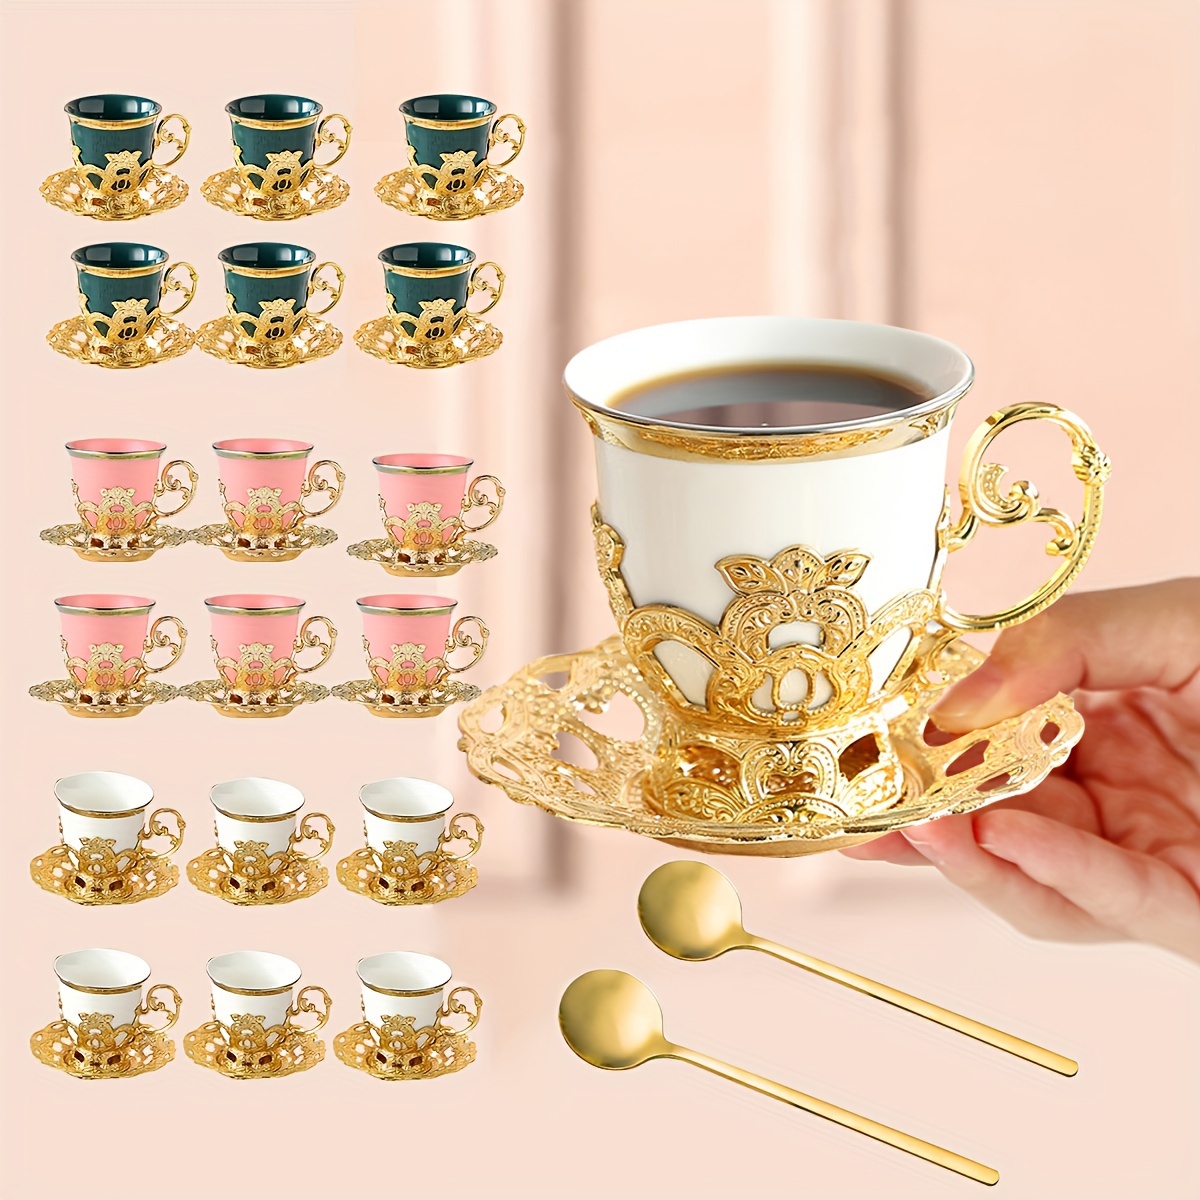 

Sakura Train Set, Turkish Arabic Coffee Cups And Saucers, Espresso Cups With Saucer Plates And Spoons, Ceramic Tea Sets With Gift Box, 2.8 Oz (golden)